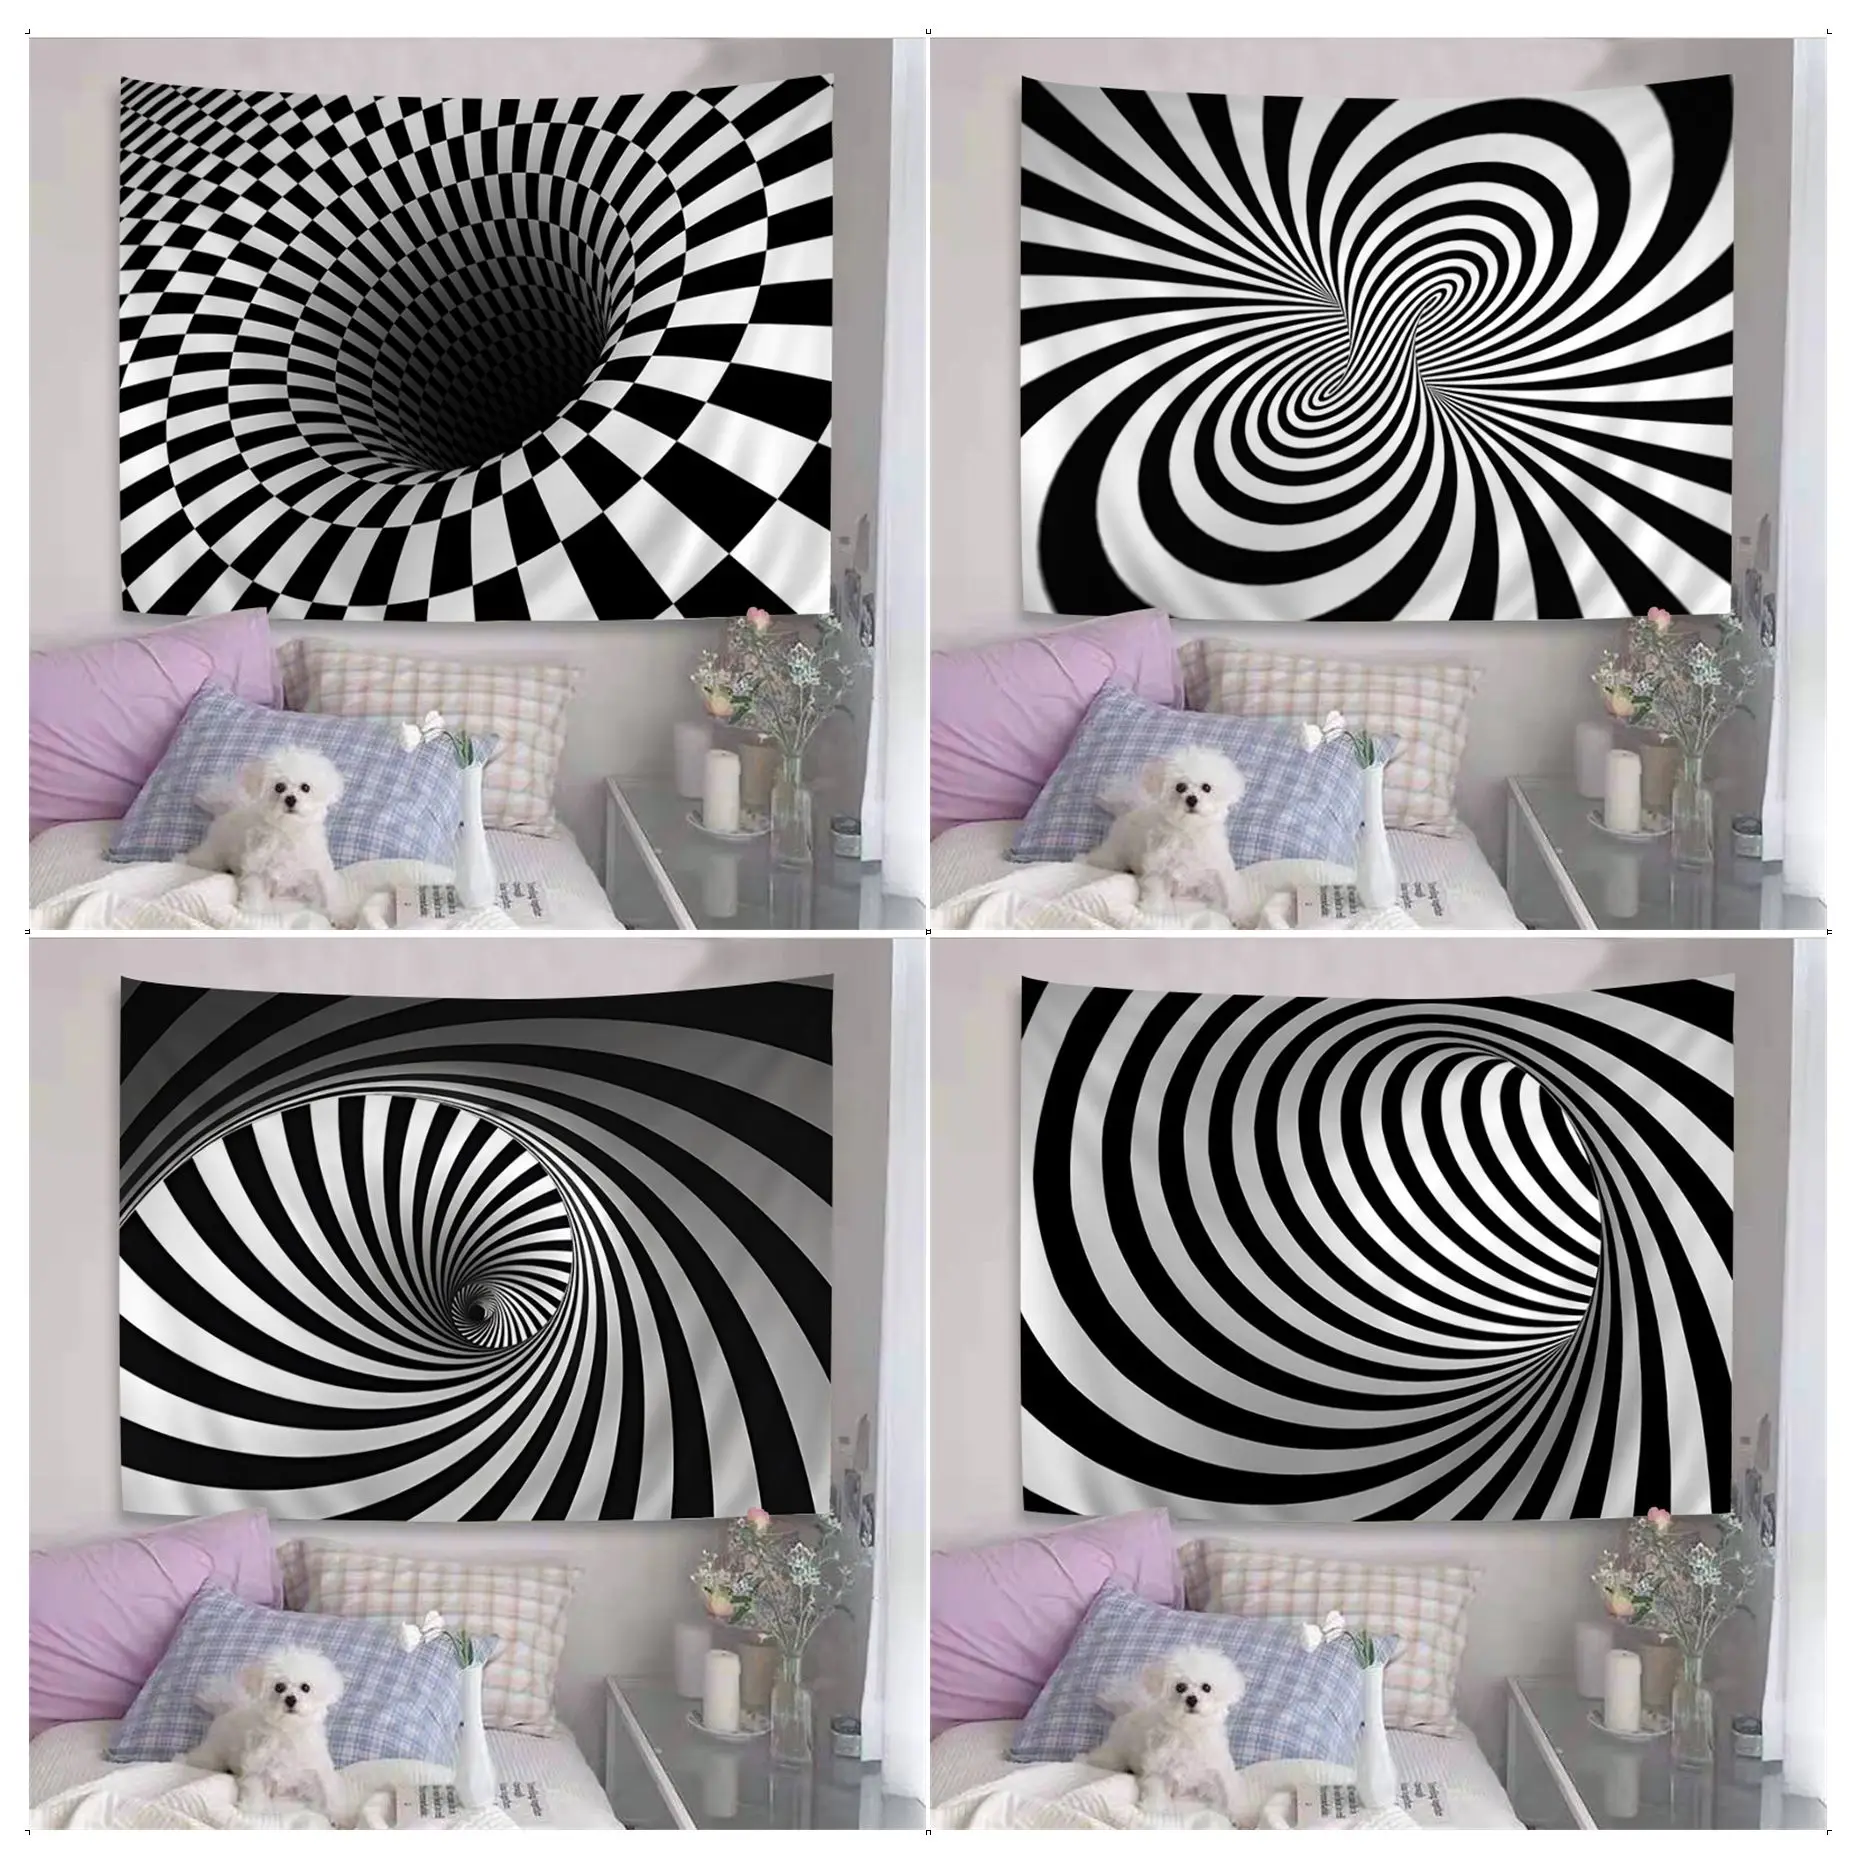 

3D Vortex Illusion Chart Tapestry Japanese Wall Tapestry Anime Wall Hanging Sheets